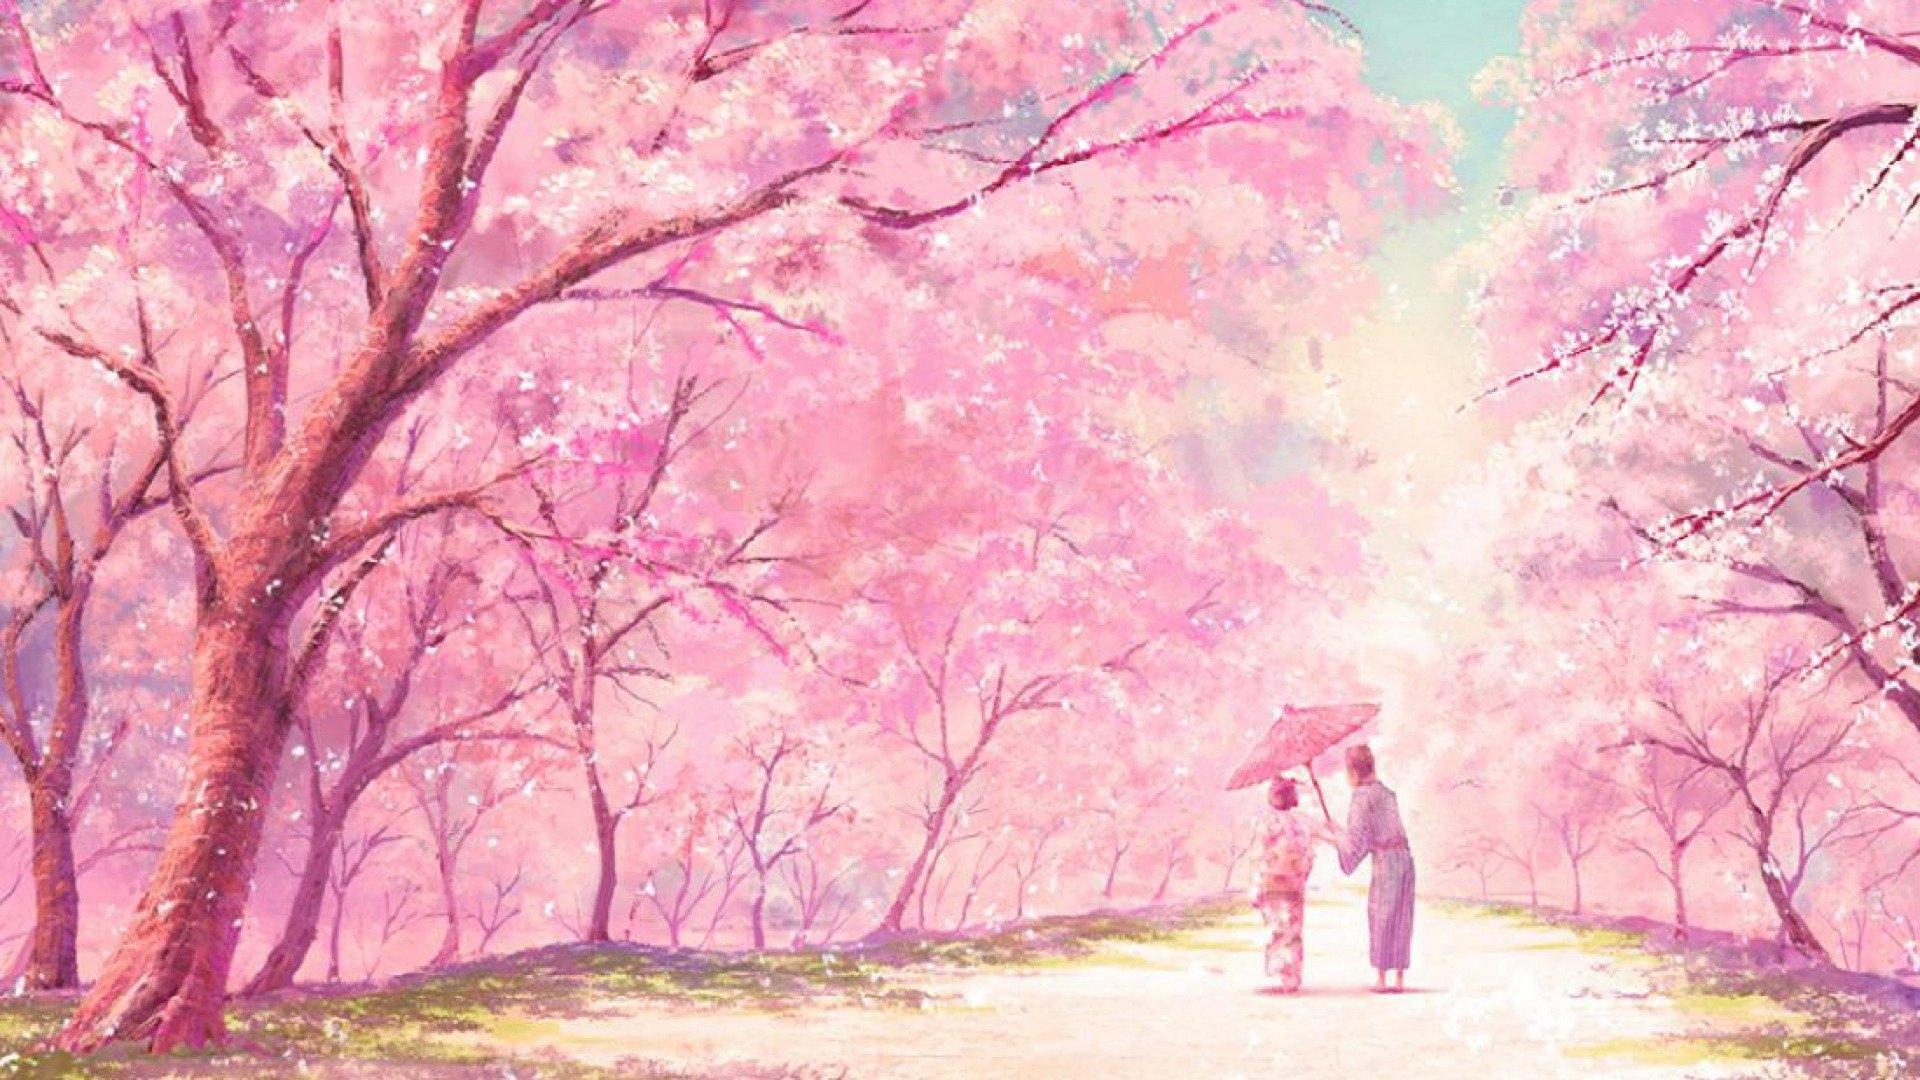 The couple in a pink cherry blossom forest - Pink, spring, pink anime, kawaii